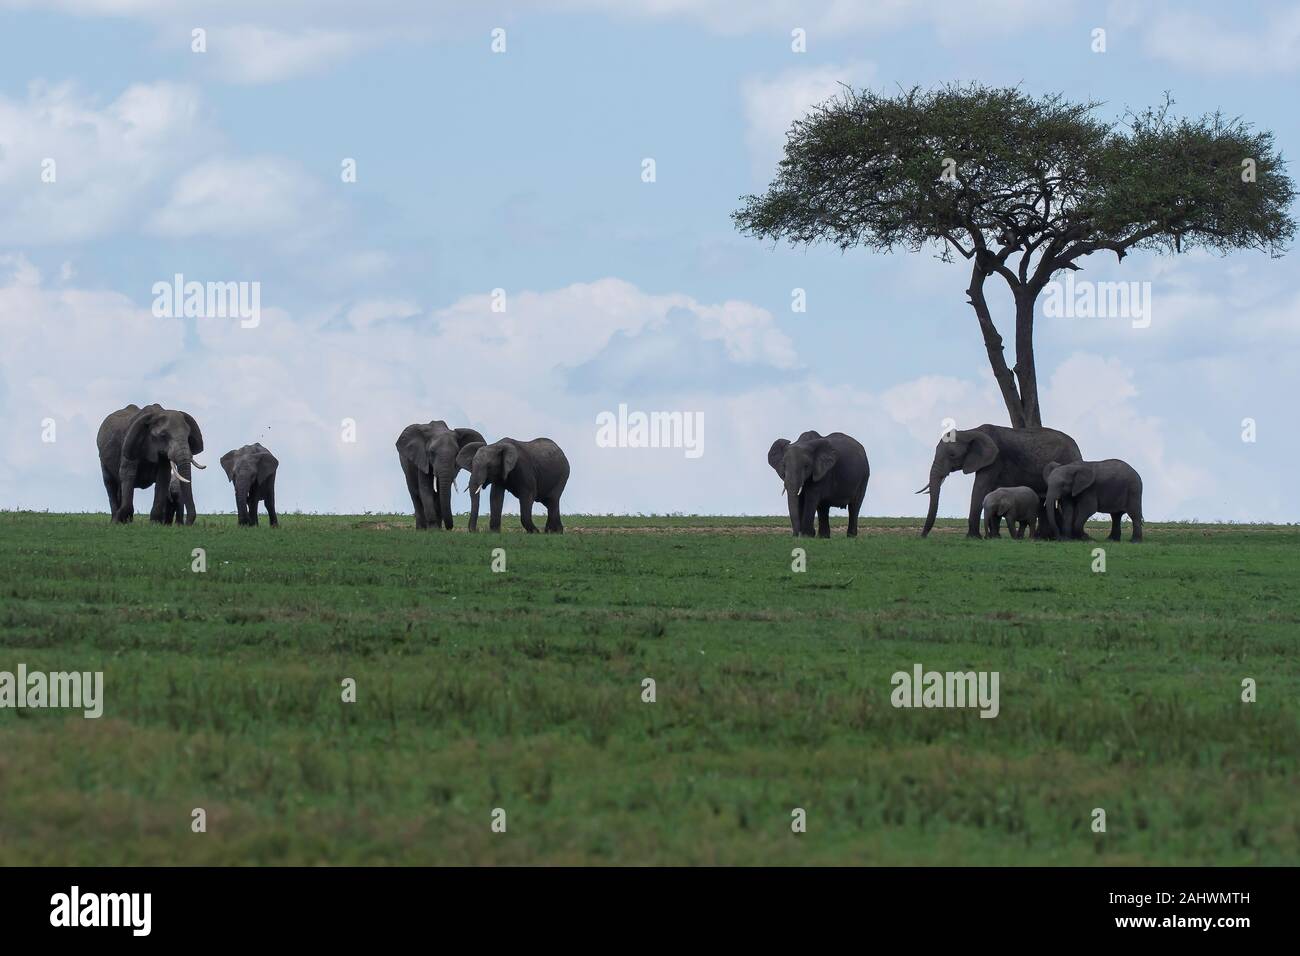 An elephant family grazing in the grasslands of africa inside Masai Mara National Reserve during a. wildlife safari Stock Photo